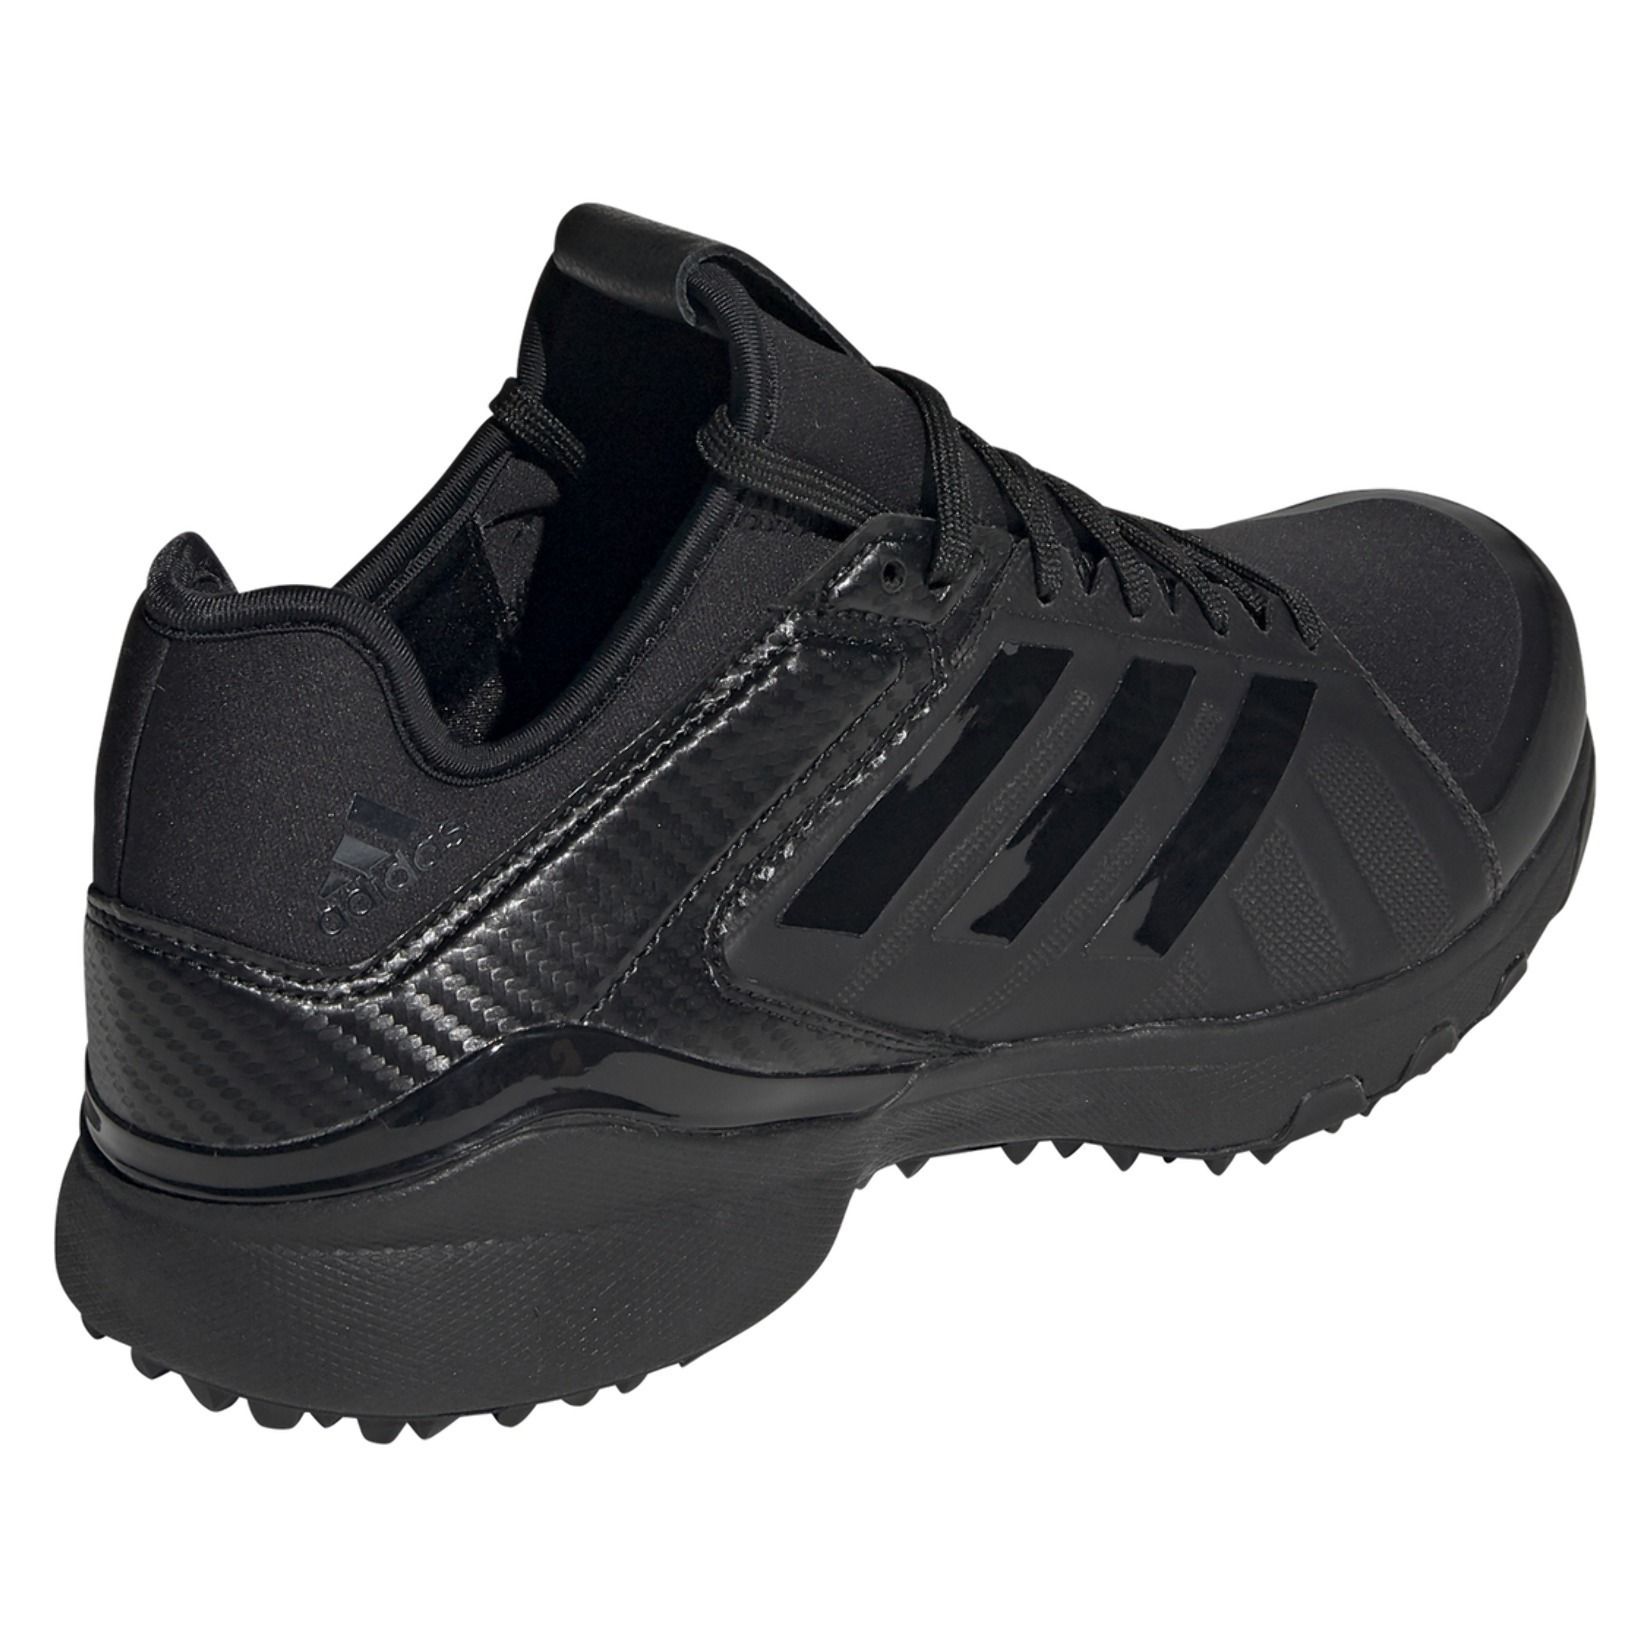 Adidas-LP Hockey Lux Shoes